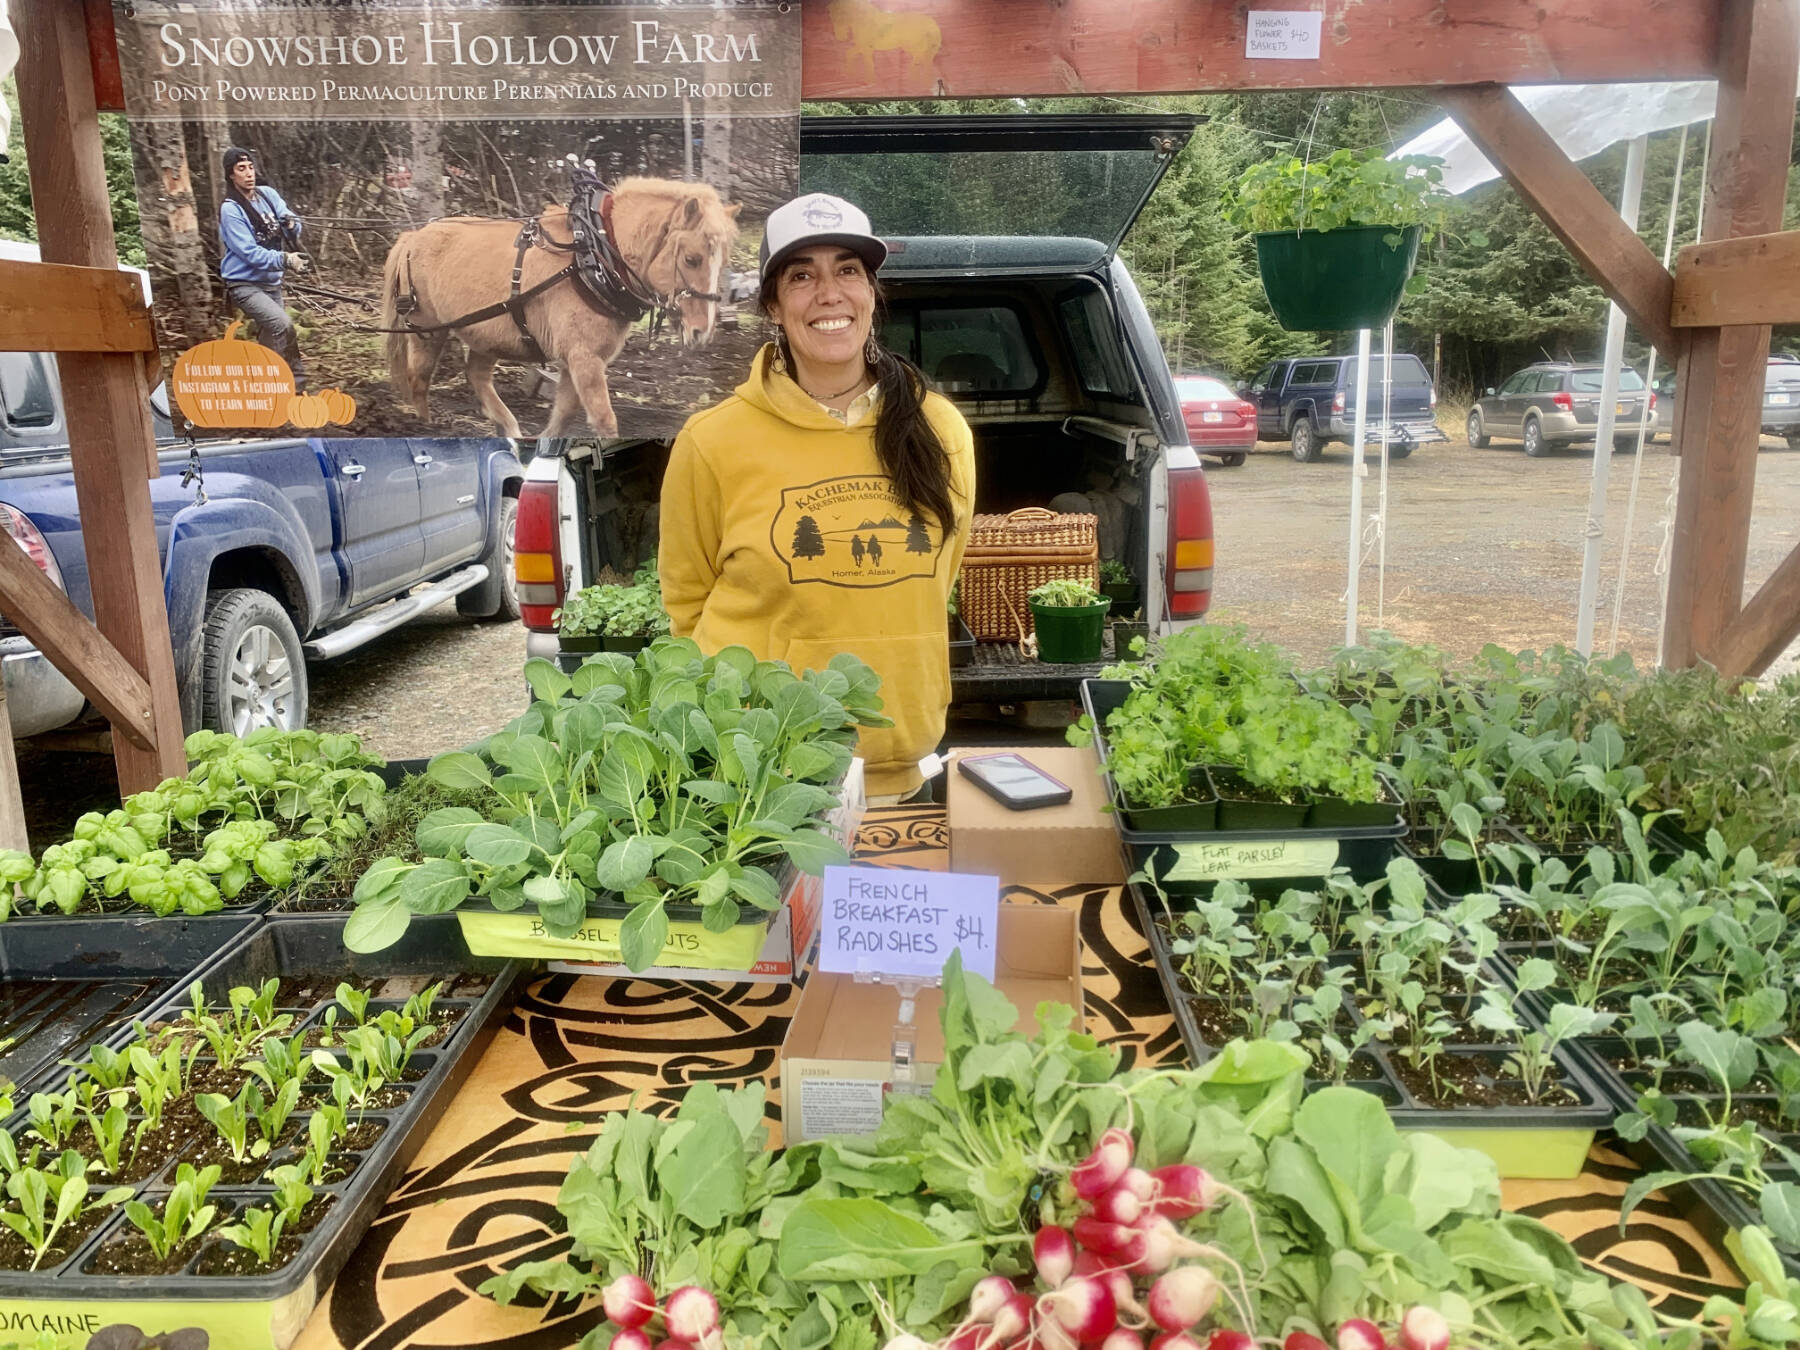 Christina Castellanos of Snowshoe Hollow Farm vends at the Homer Farmers Market on opening day, Saturday, May 27, 2023 in Homer, Alaska. Photo by Christina Whiting